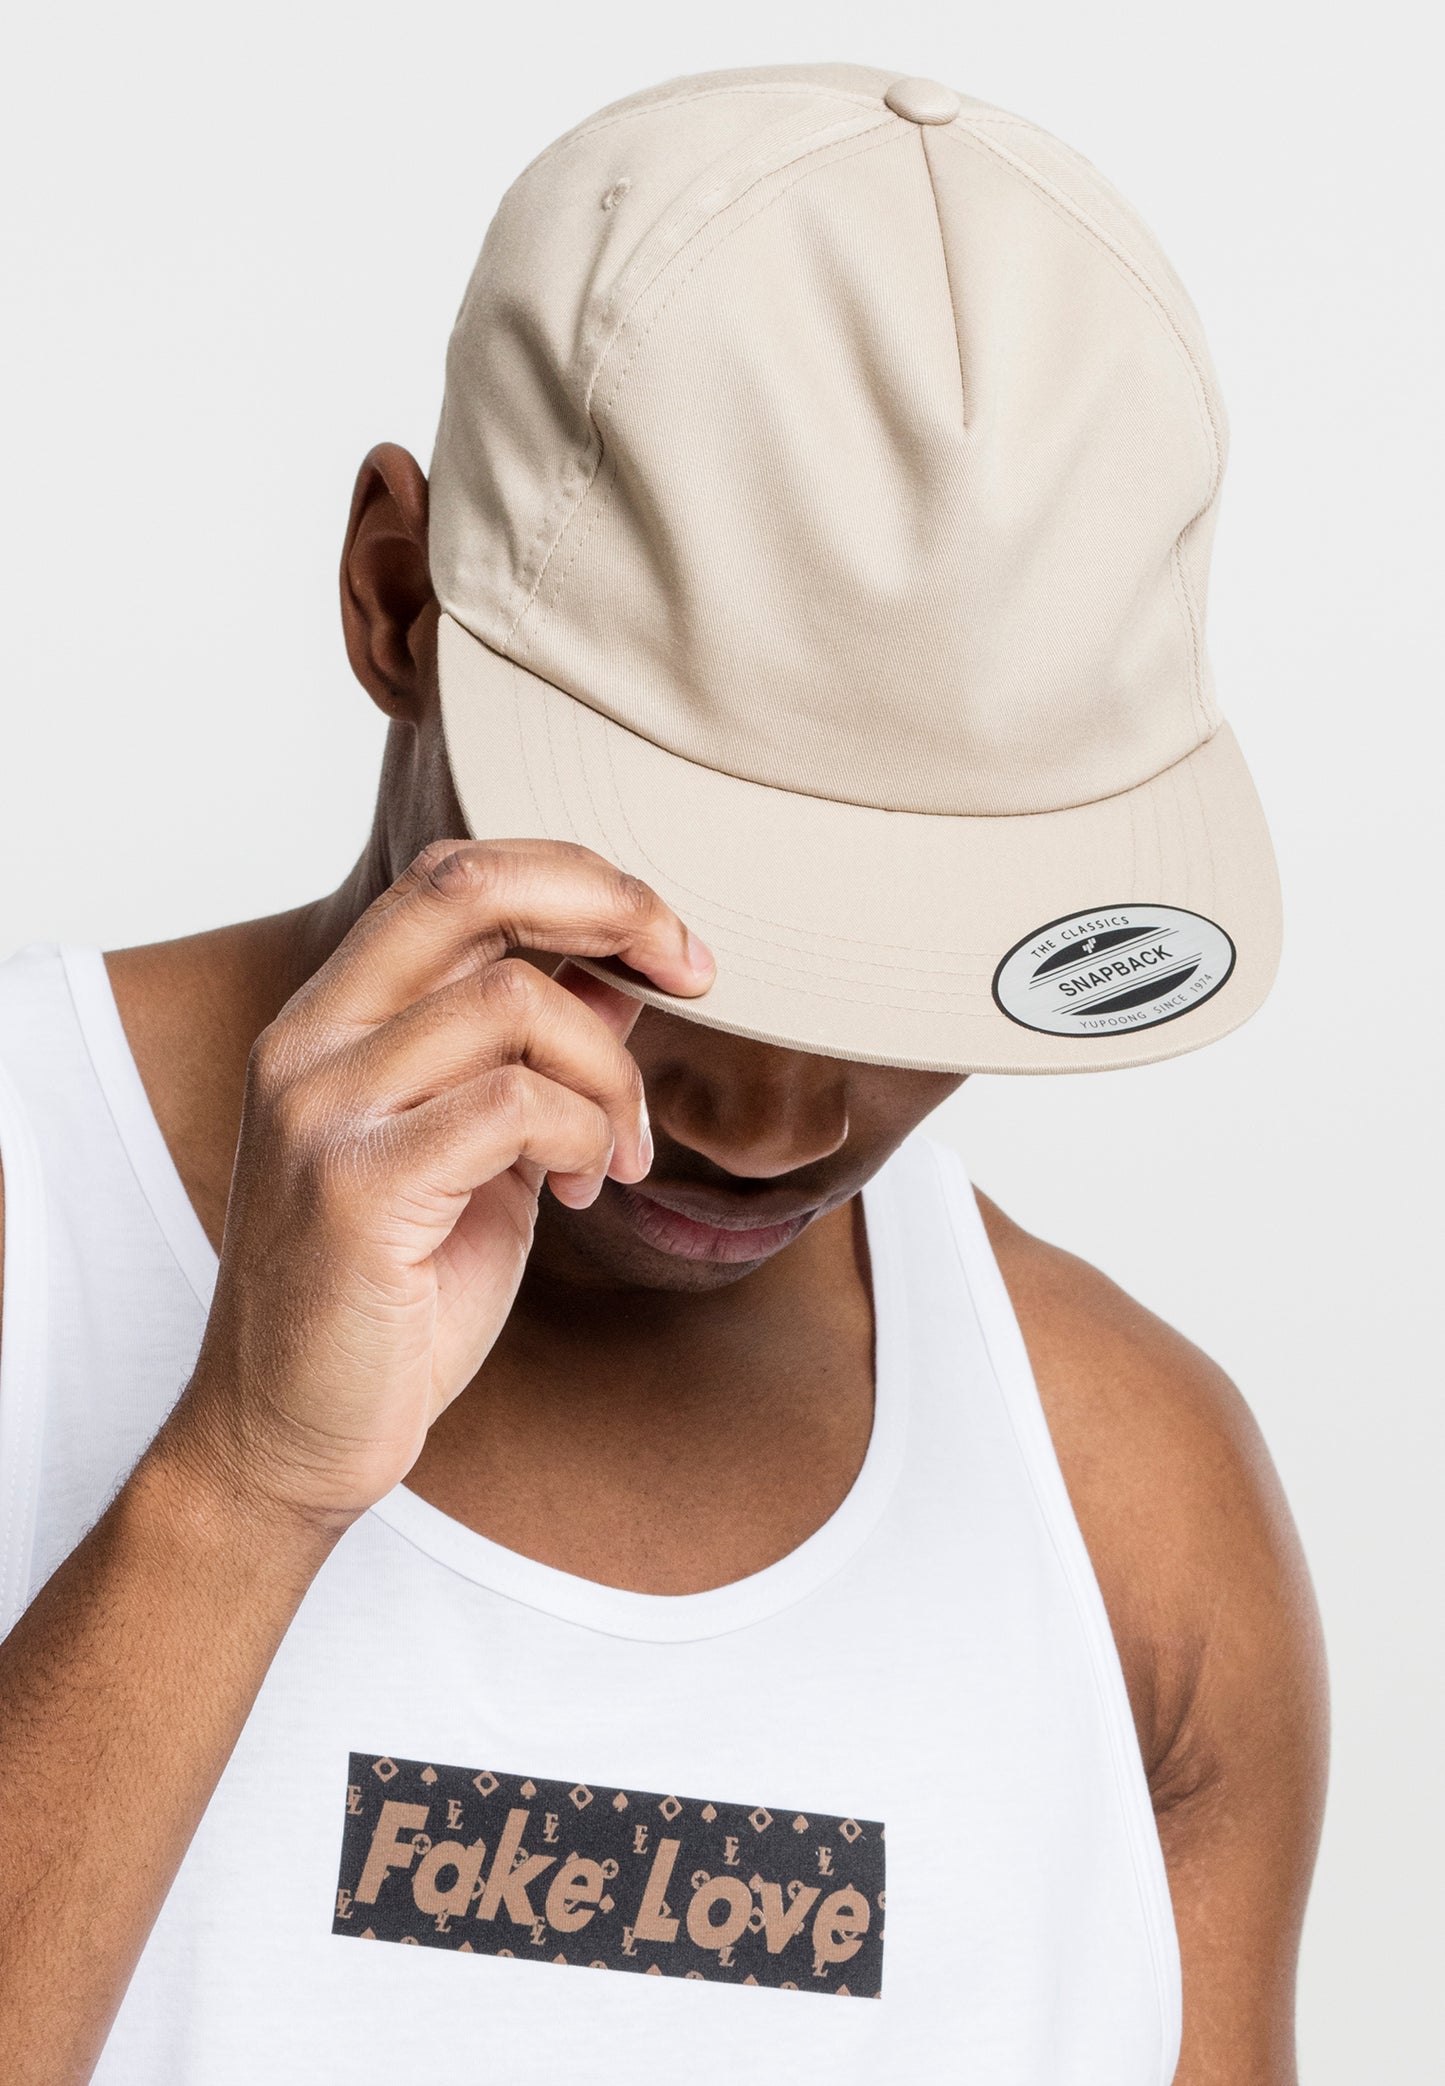 Unstructured 5-Panel Snapback